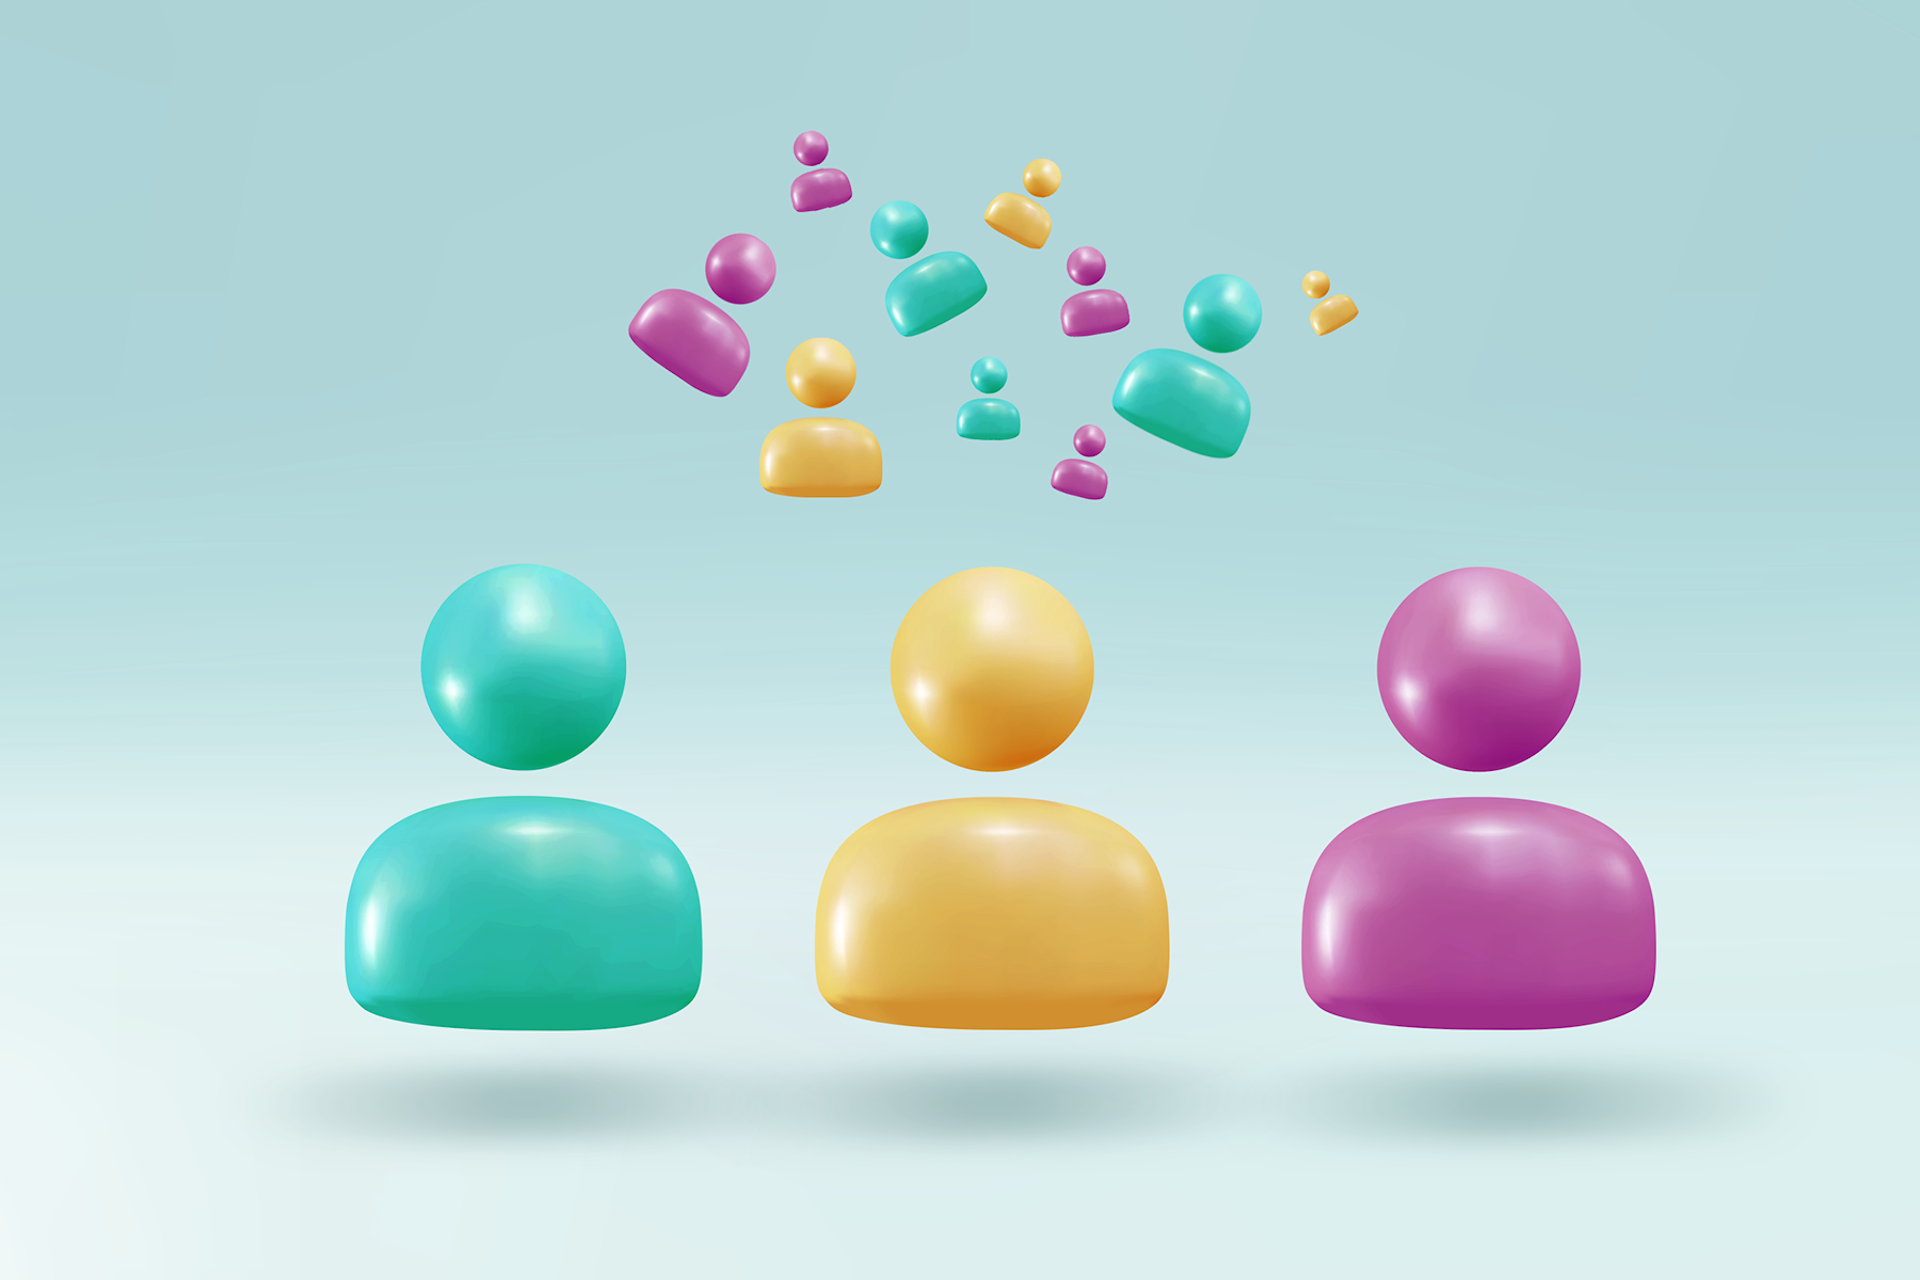 An image showing three large symbols for individuals, in different colors. One person is blue, the middle person is yellow, and the third person is purple. They are in the foreground and behind them are floating people in the same colors. Audience segmentation blog post main image.